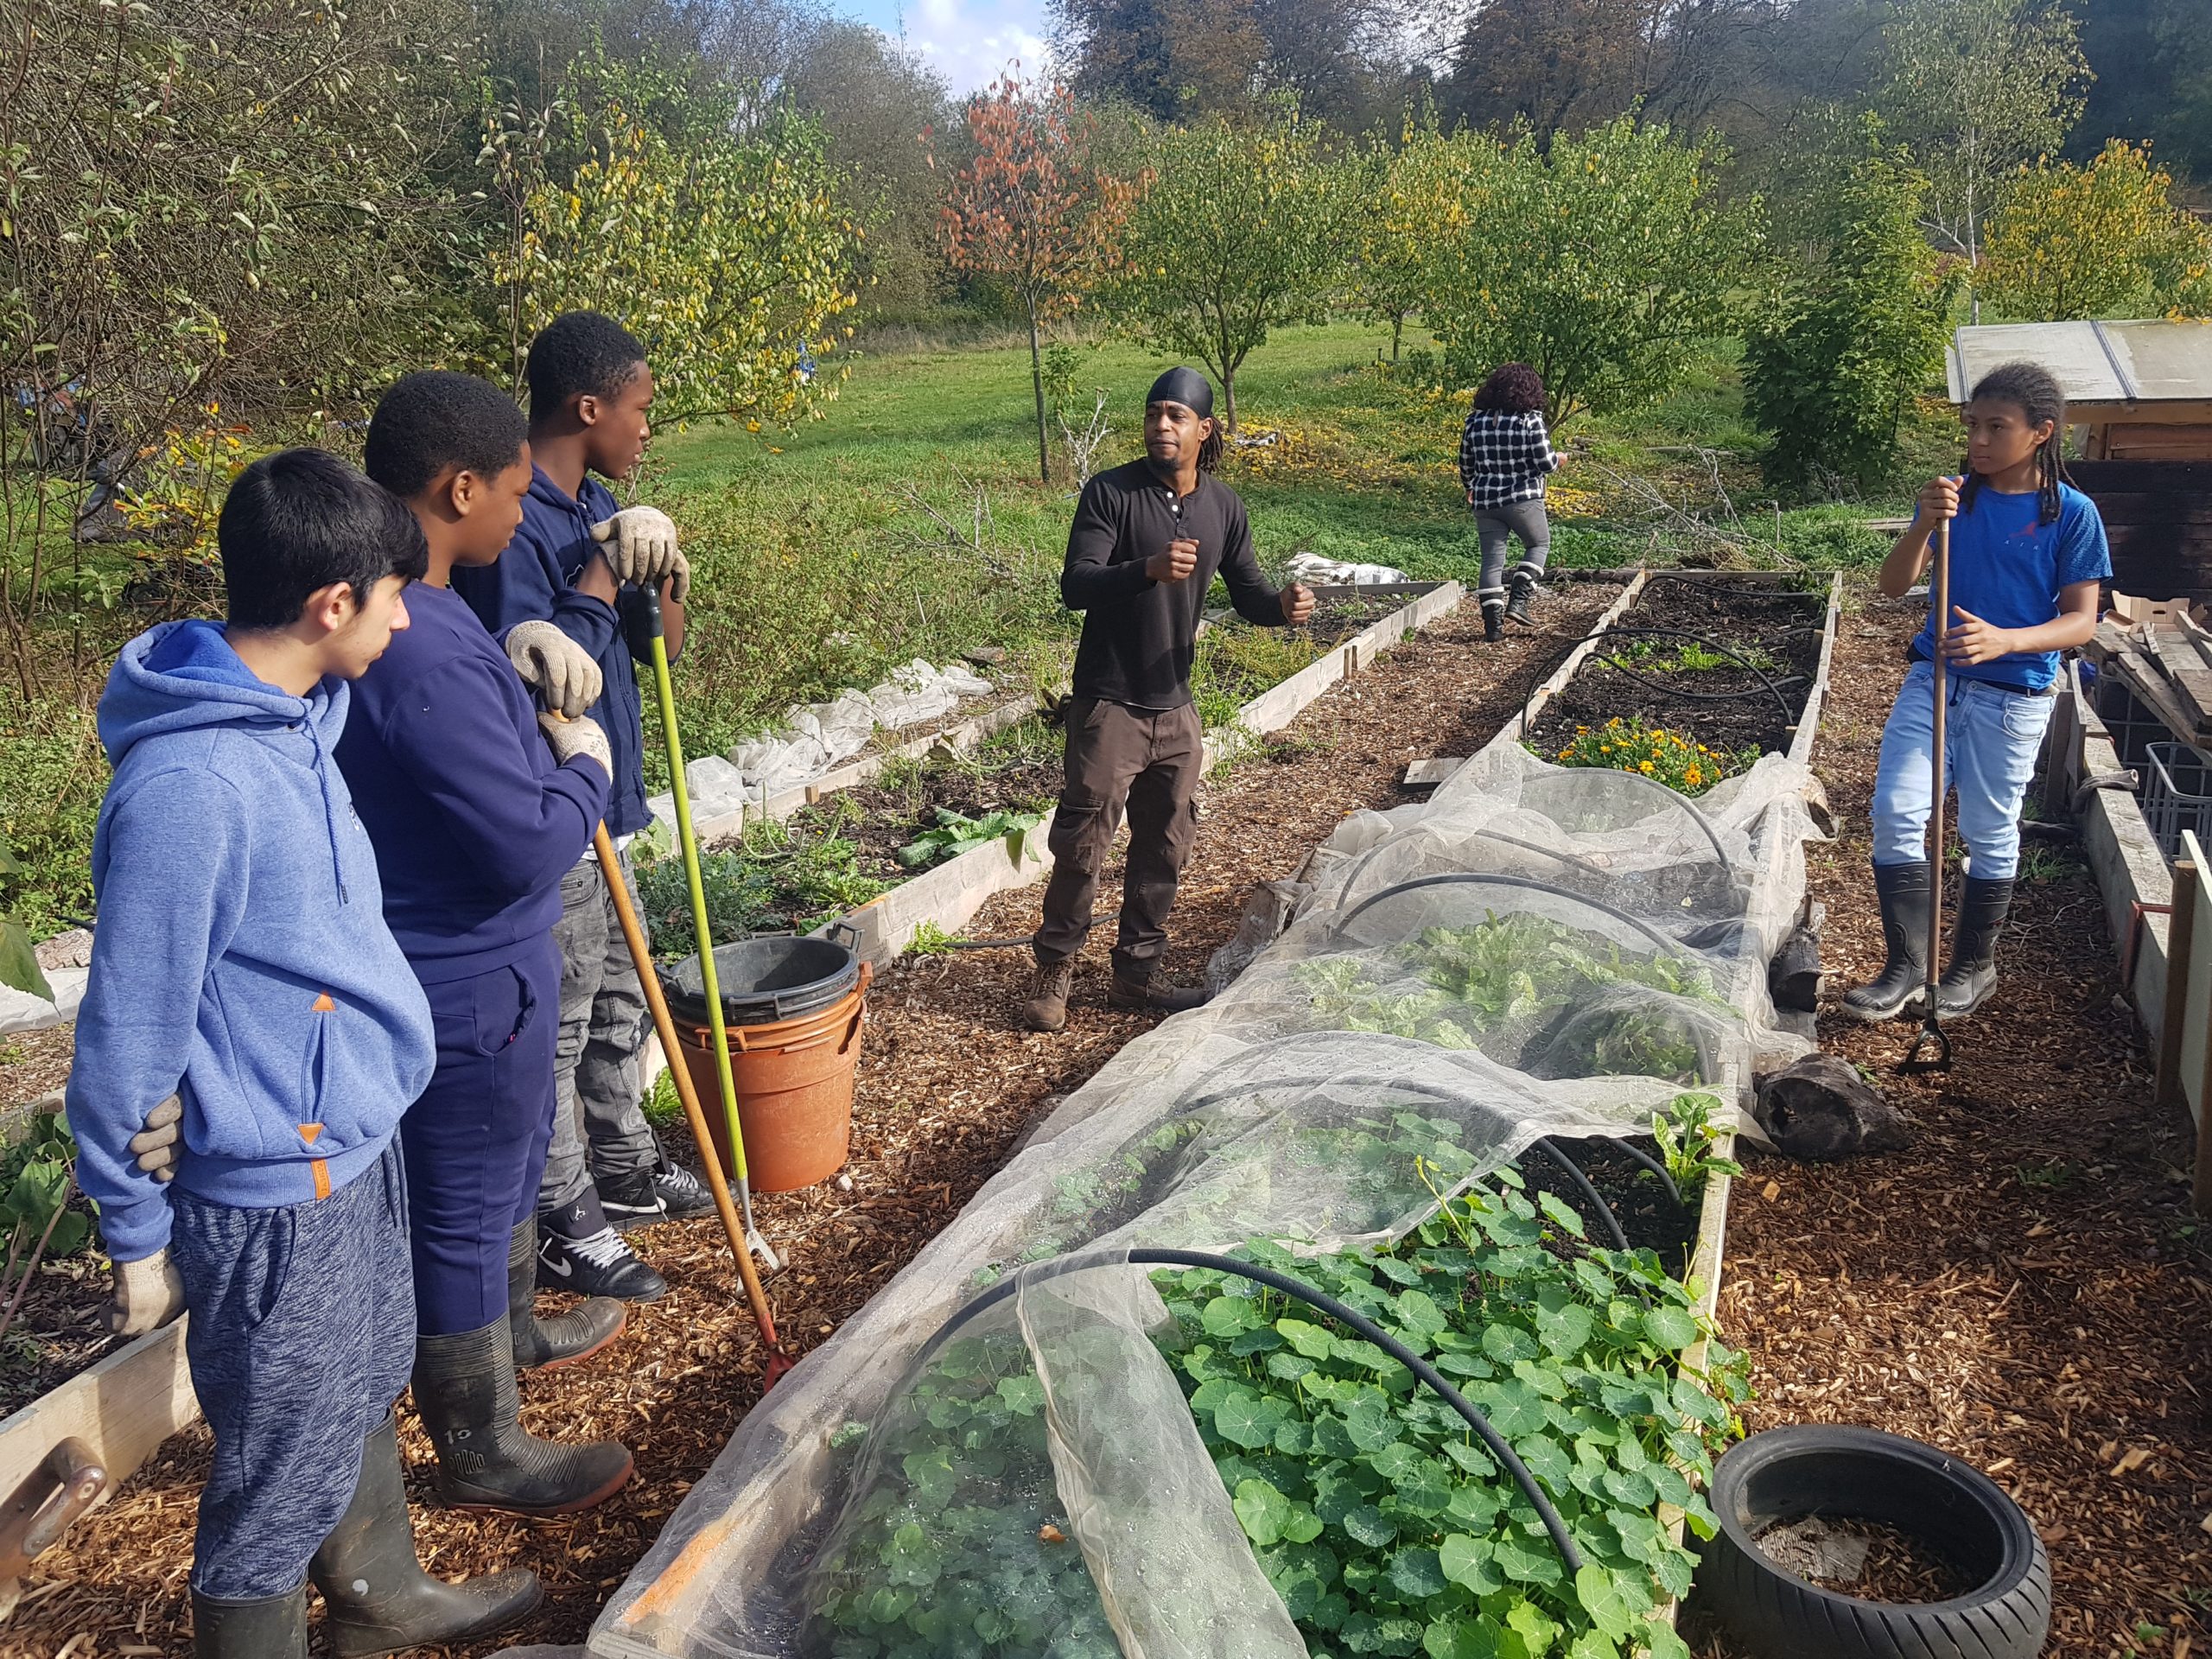 Students at garden project